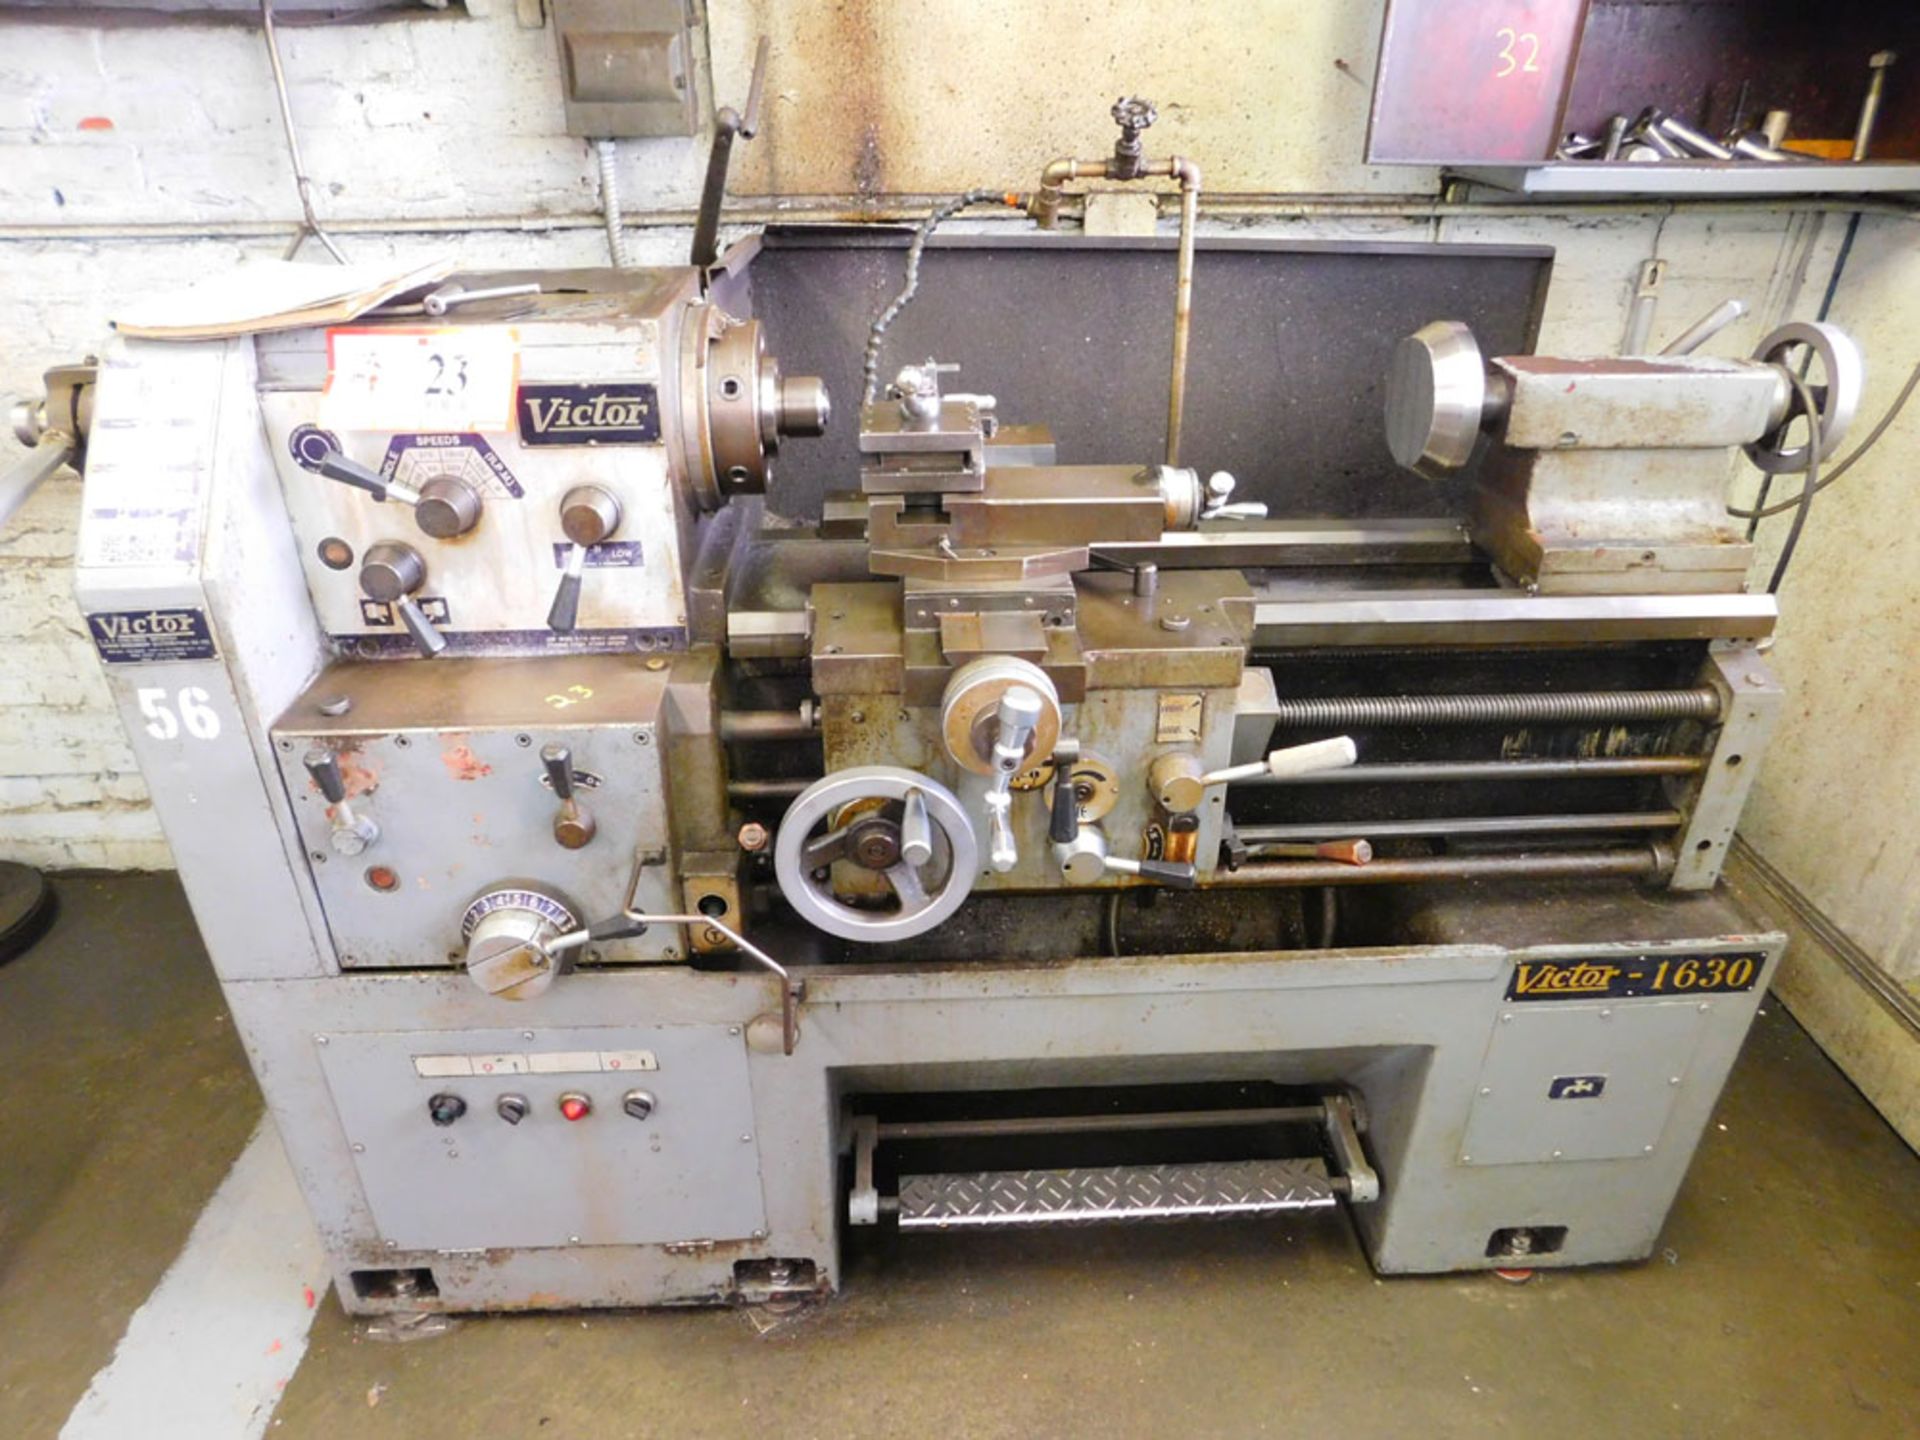 Victor Engine Lathe Mdl 1630, 16" Swing, 30" Between Center, s/n 45327